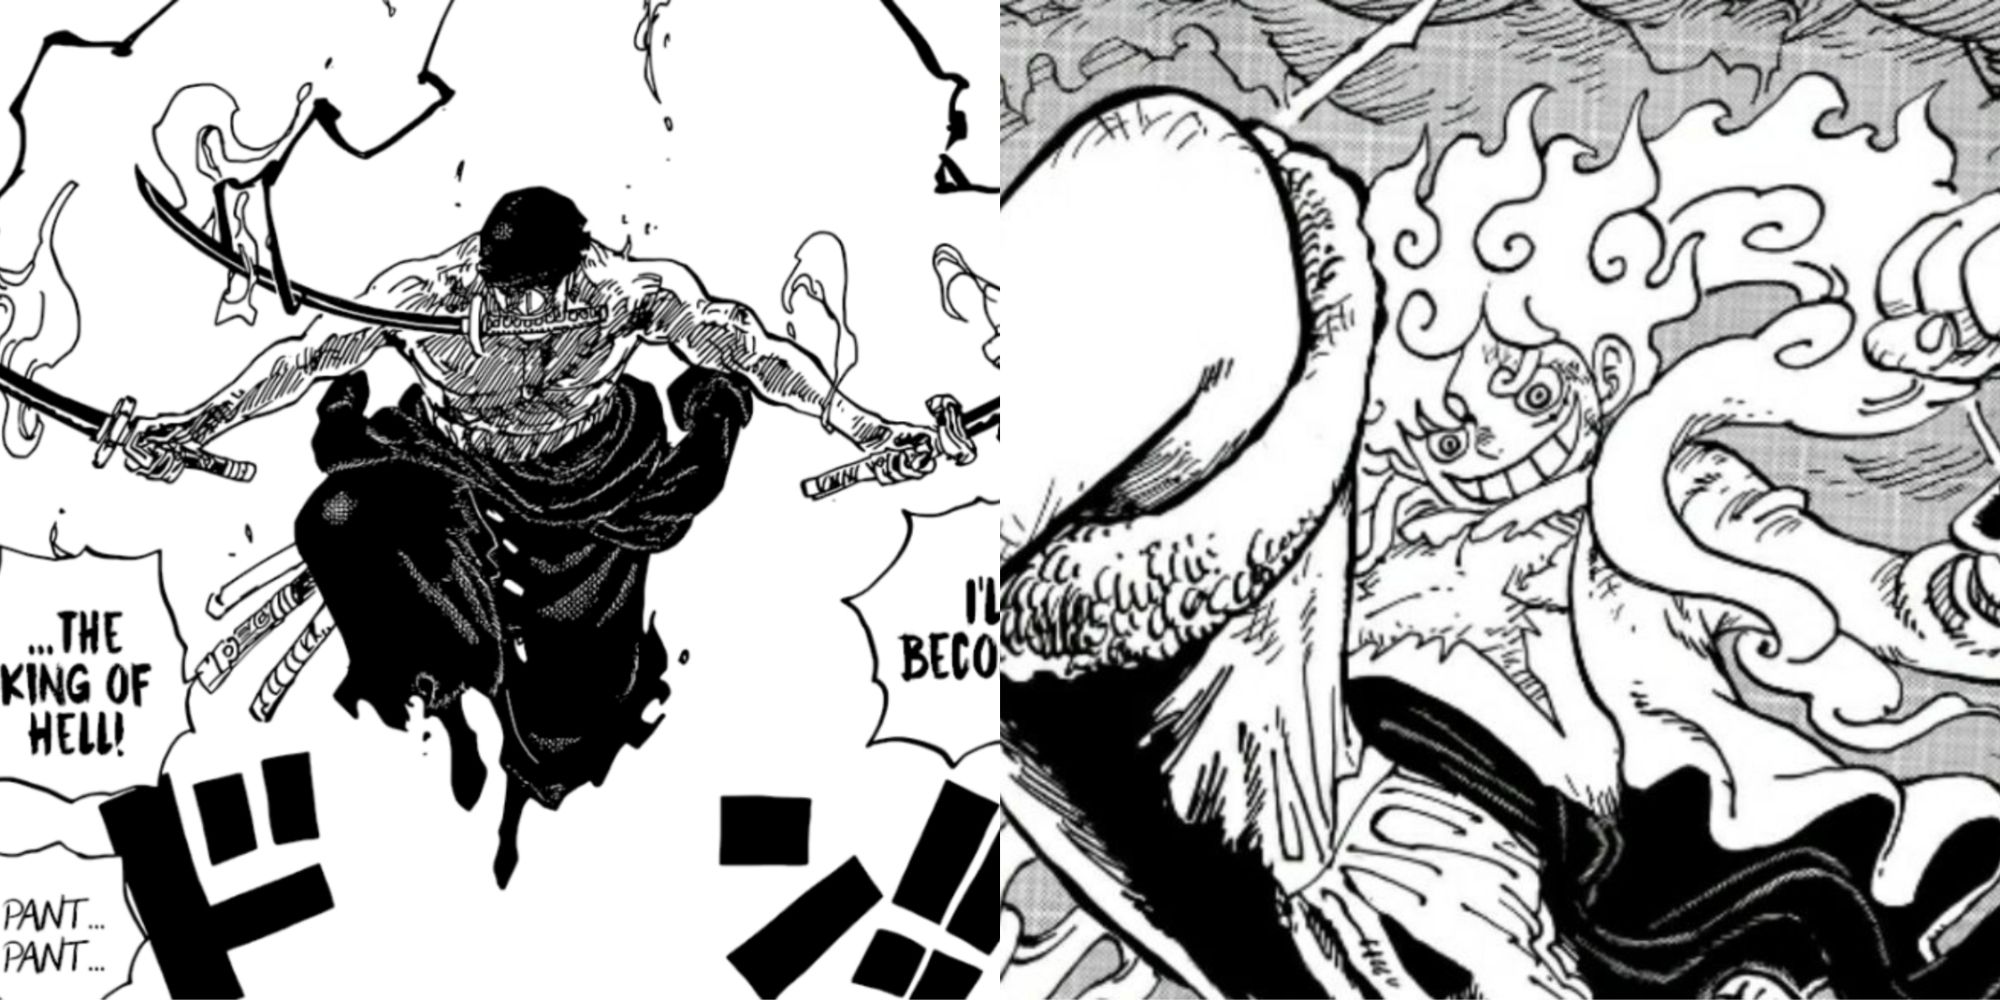 Who would win in a fight, Yamato (One Piece) or King (One piece